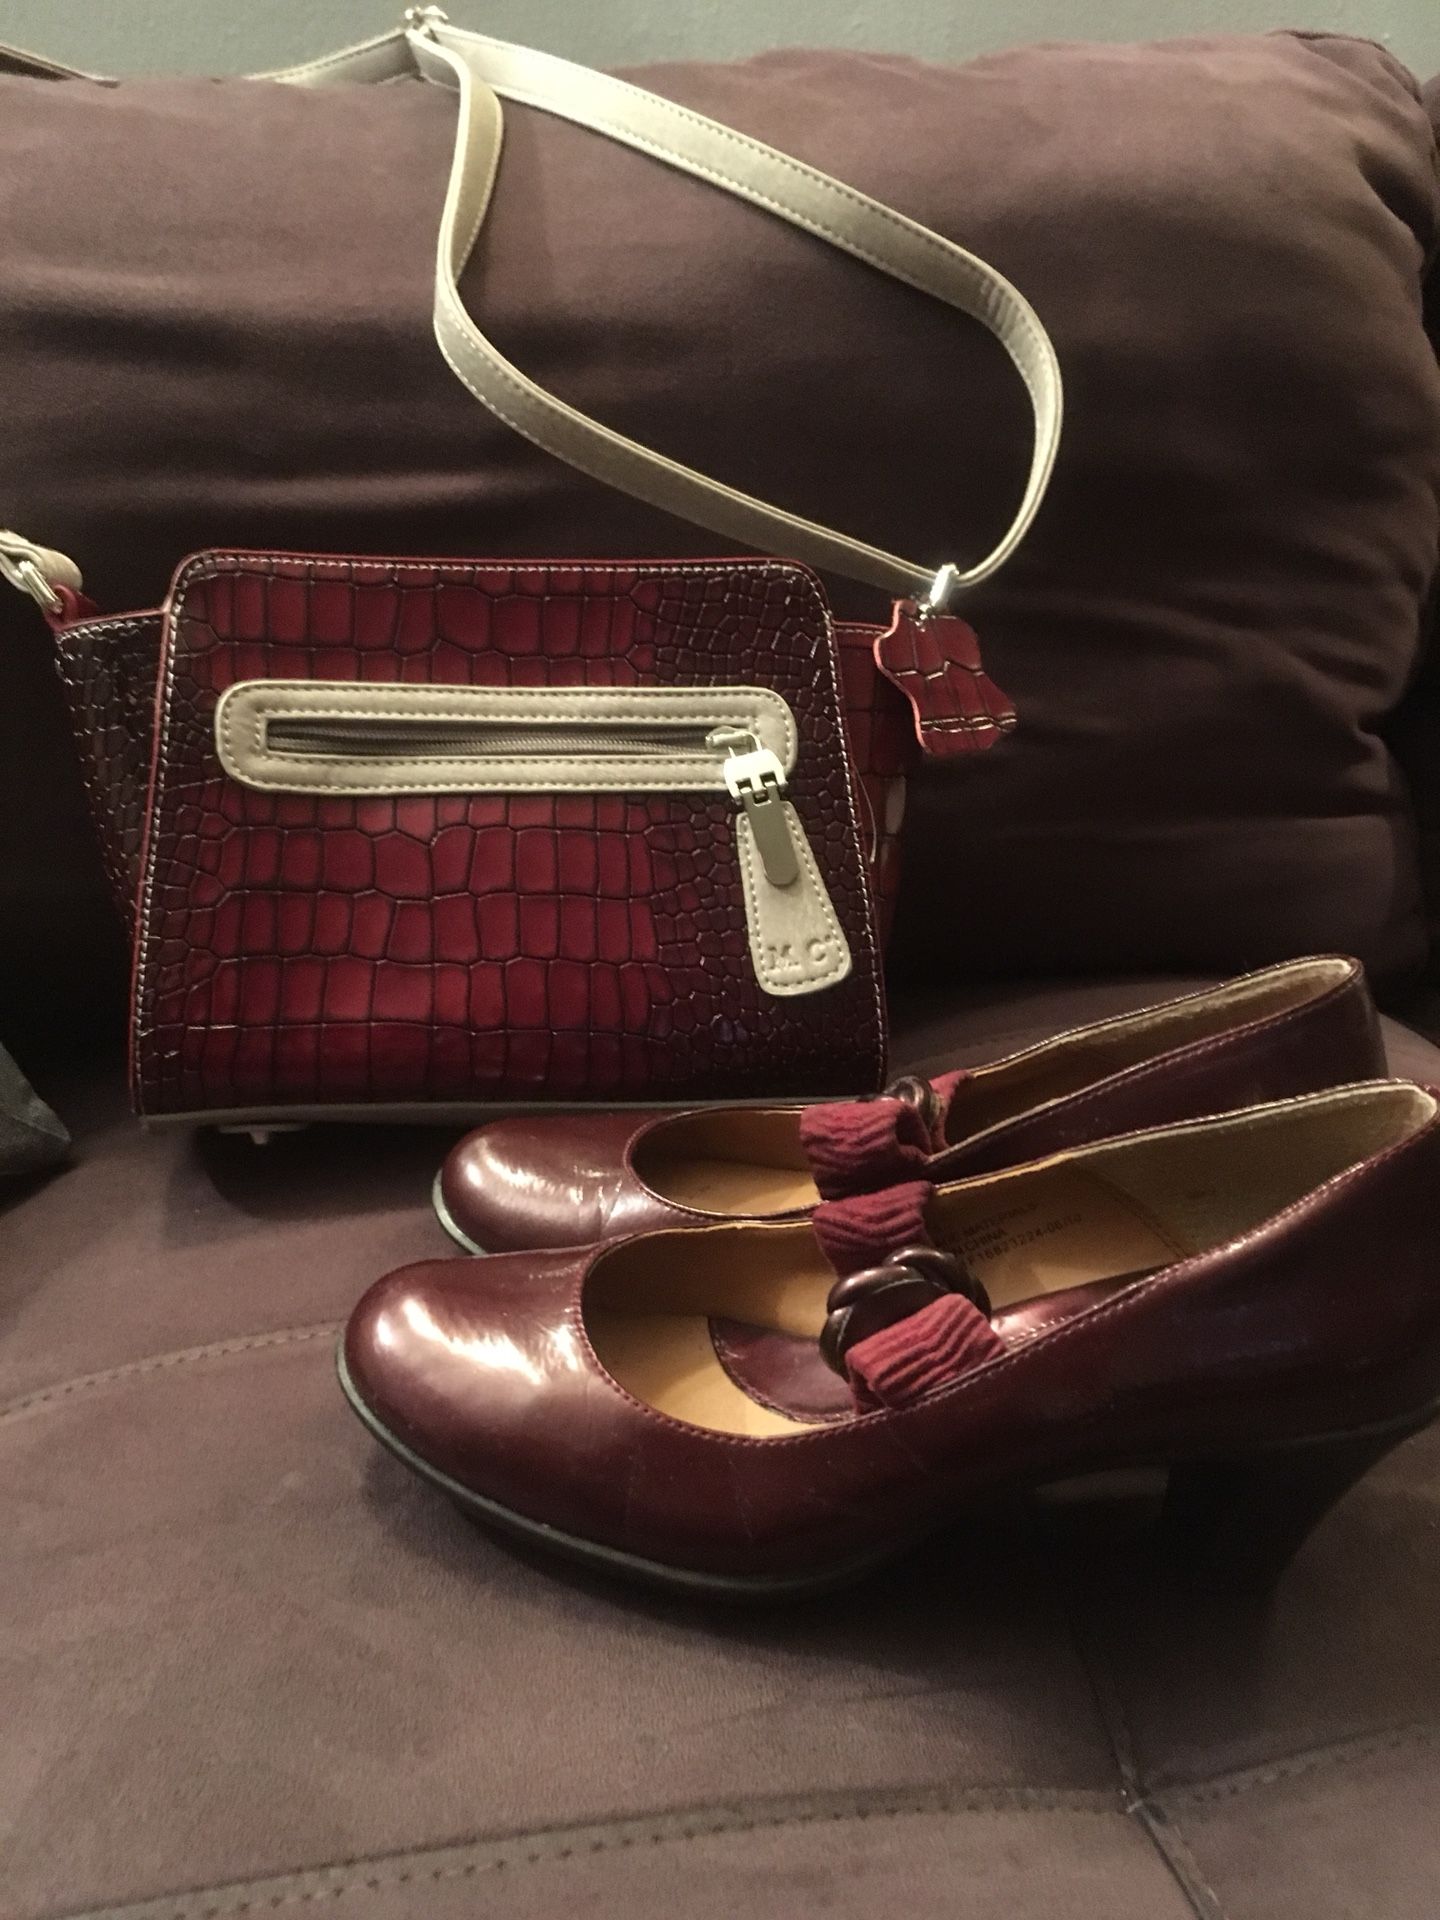 Burgundy bag and shoes FREE